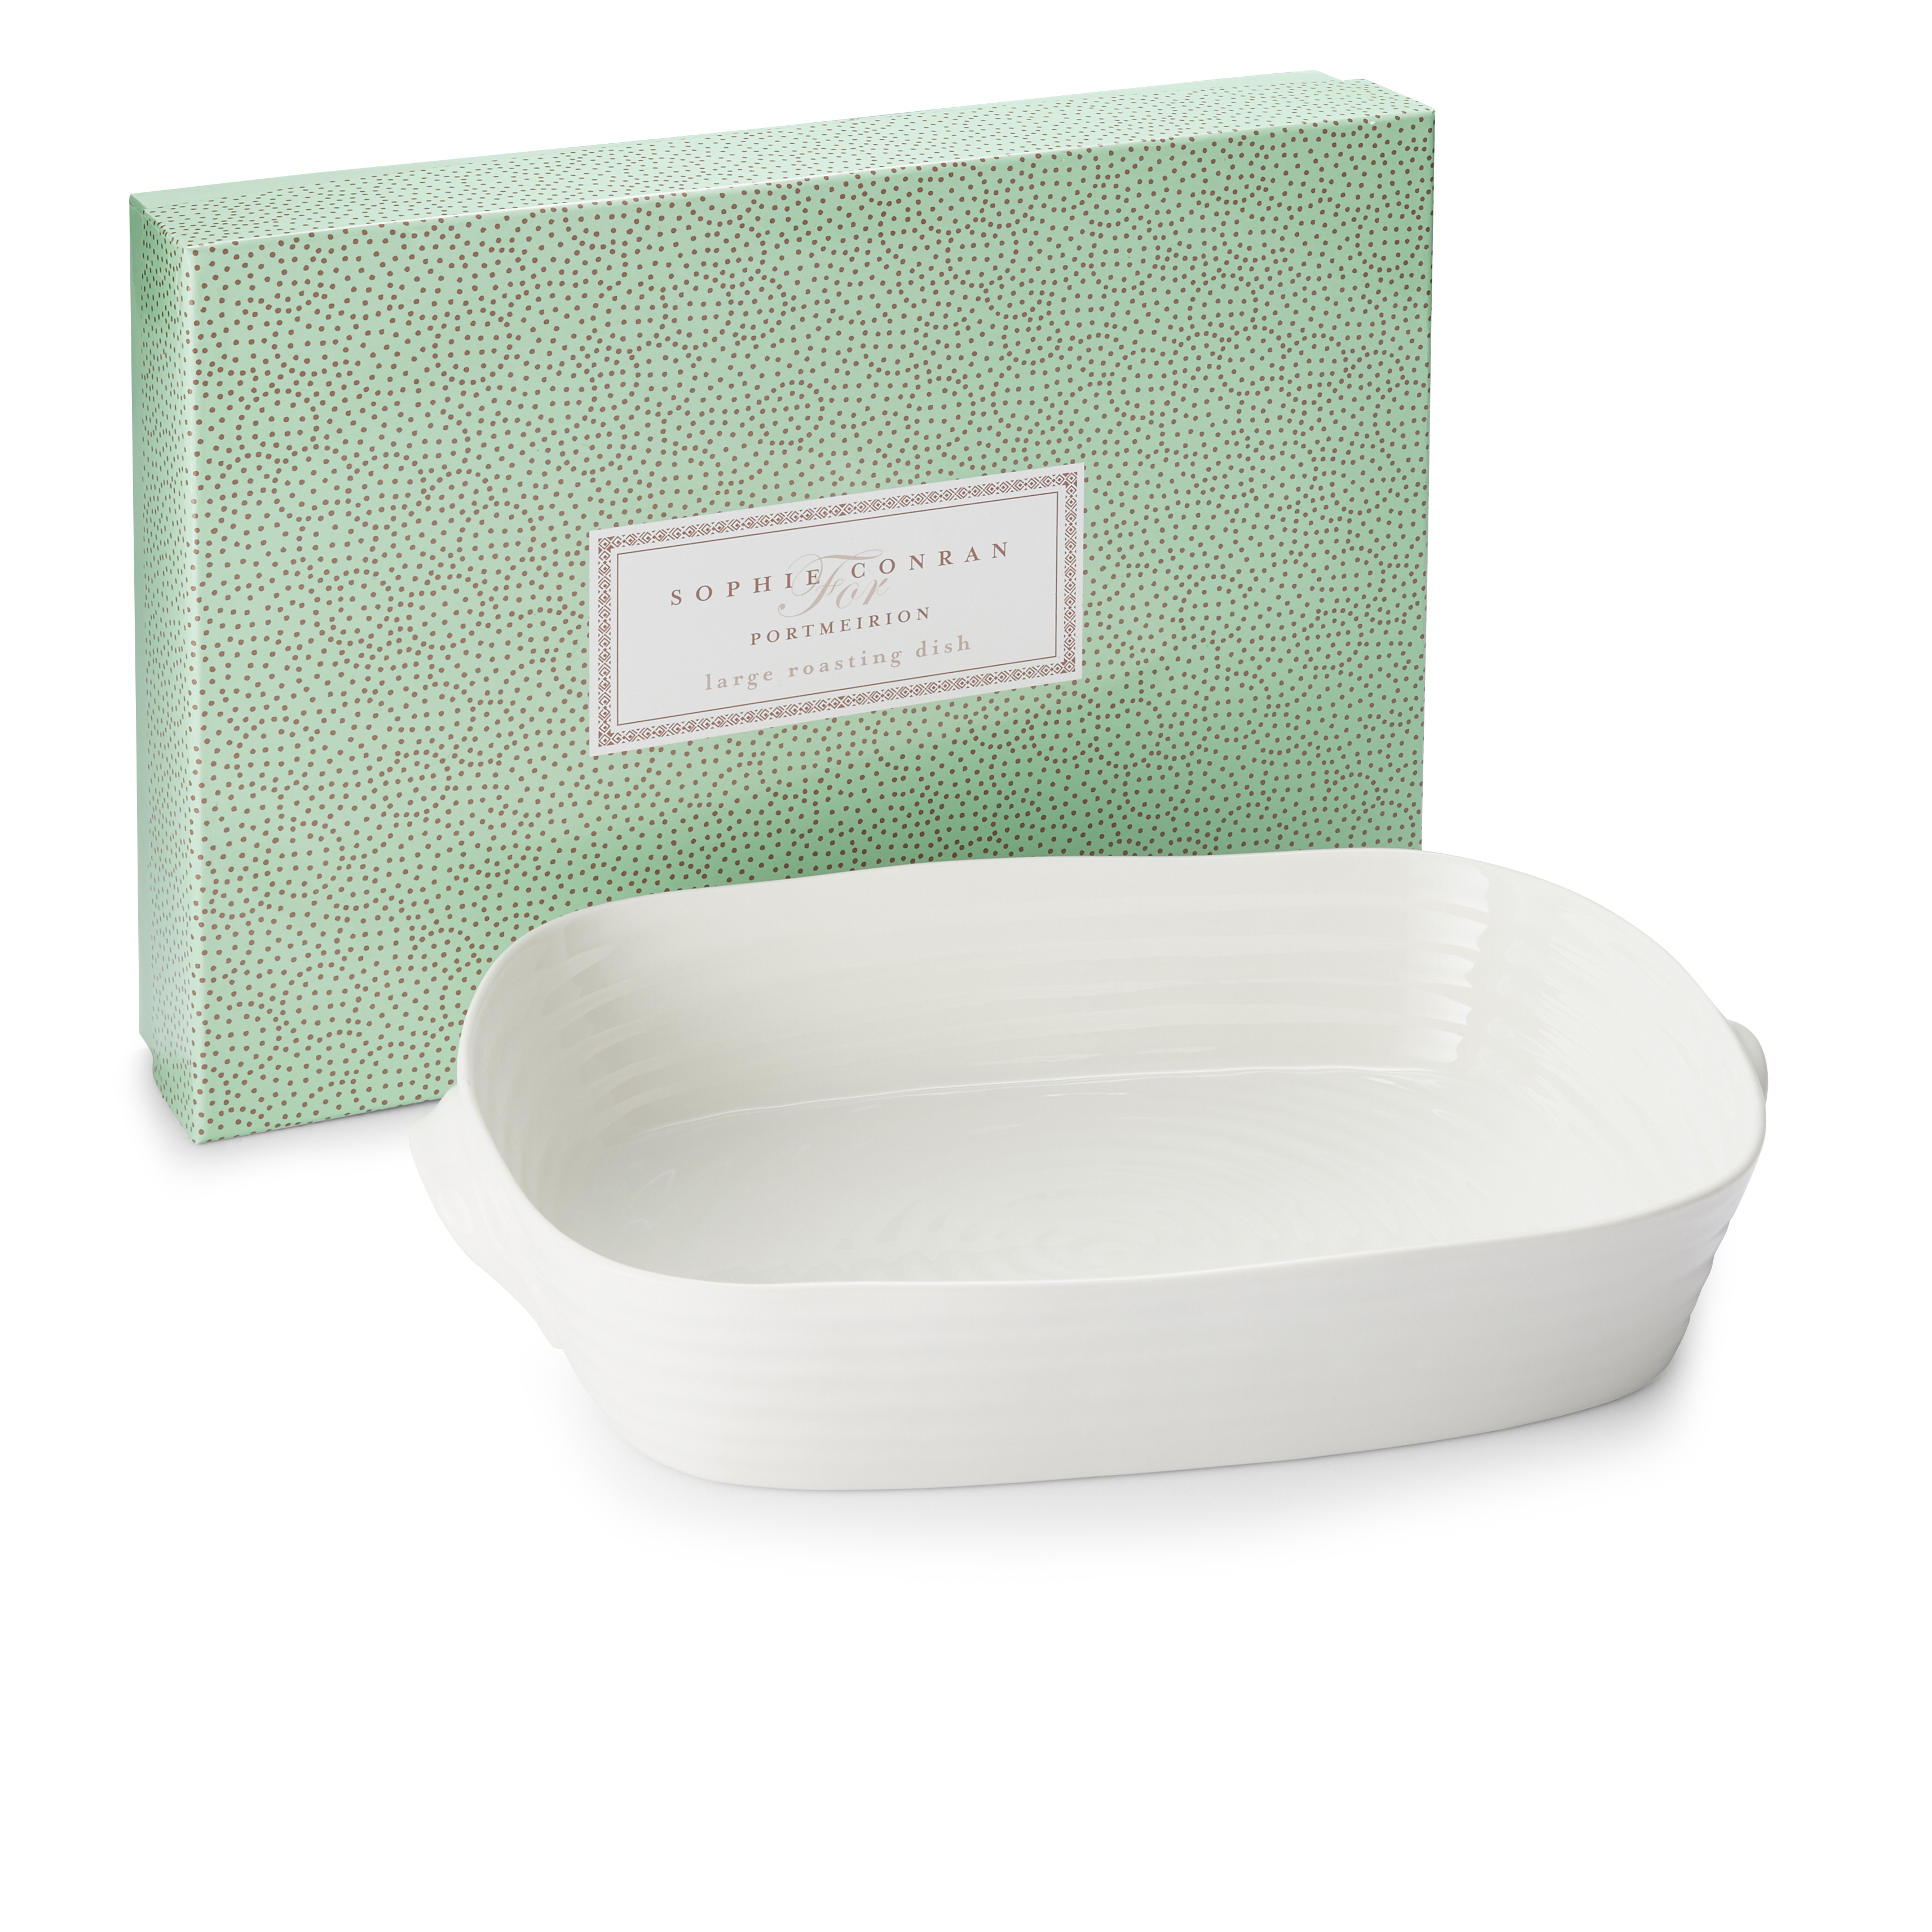 Sophie Conran Handled Roasting Dish, White image number null